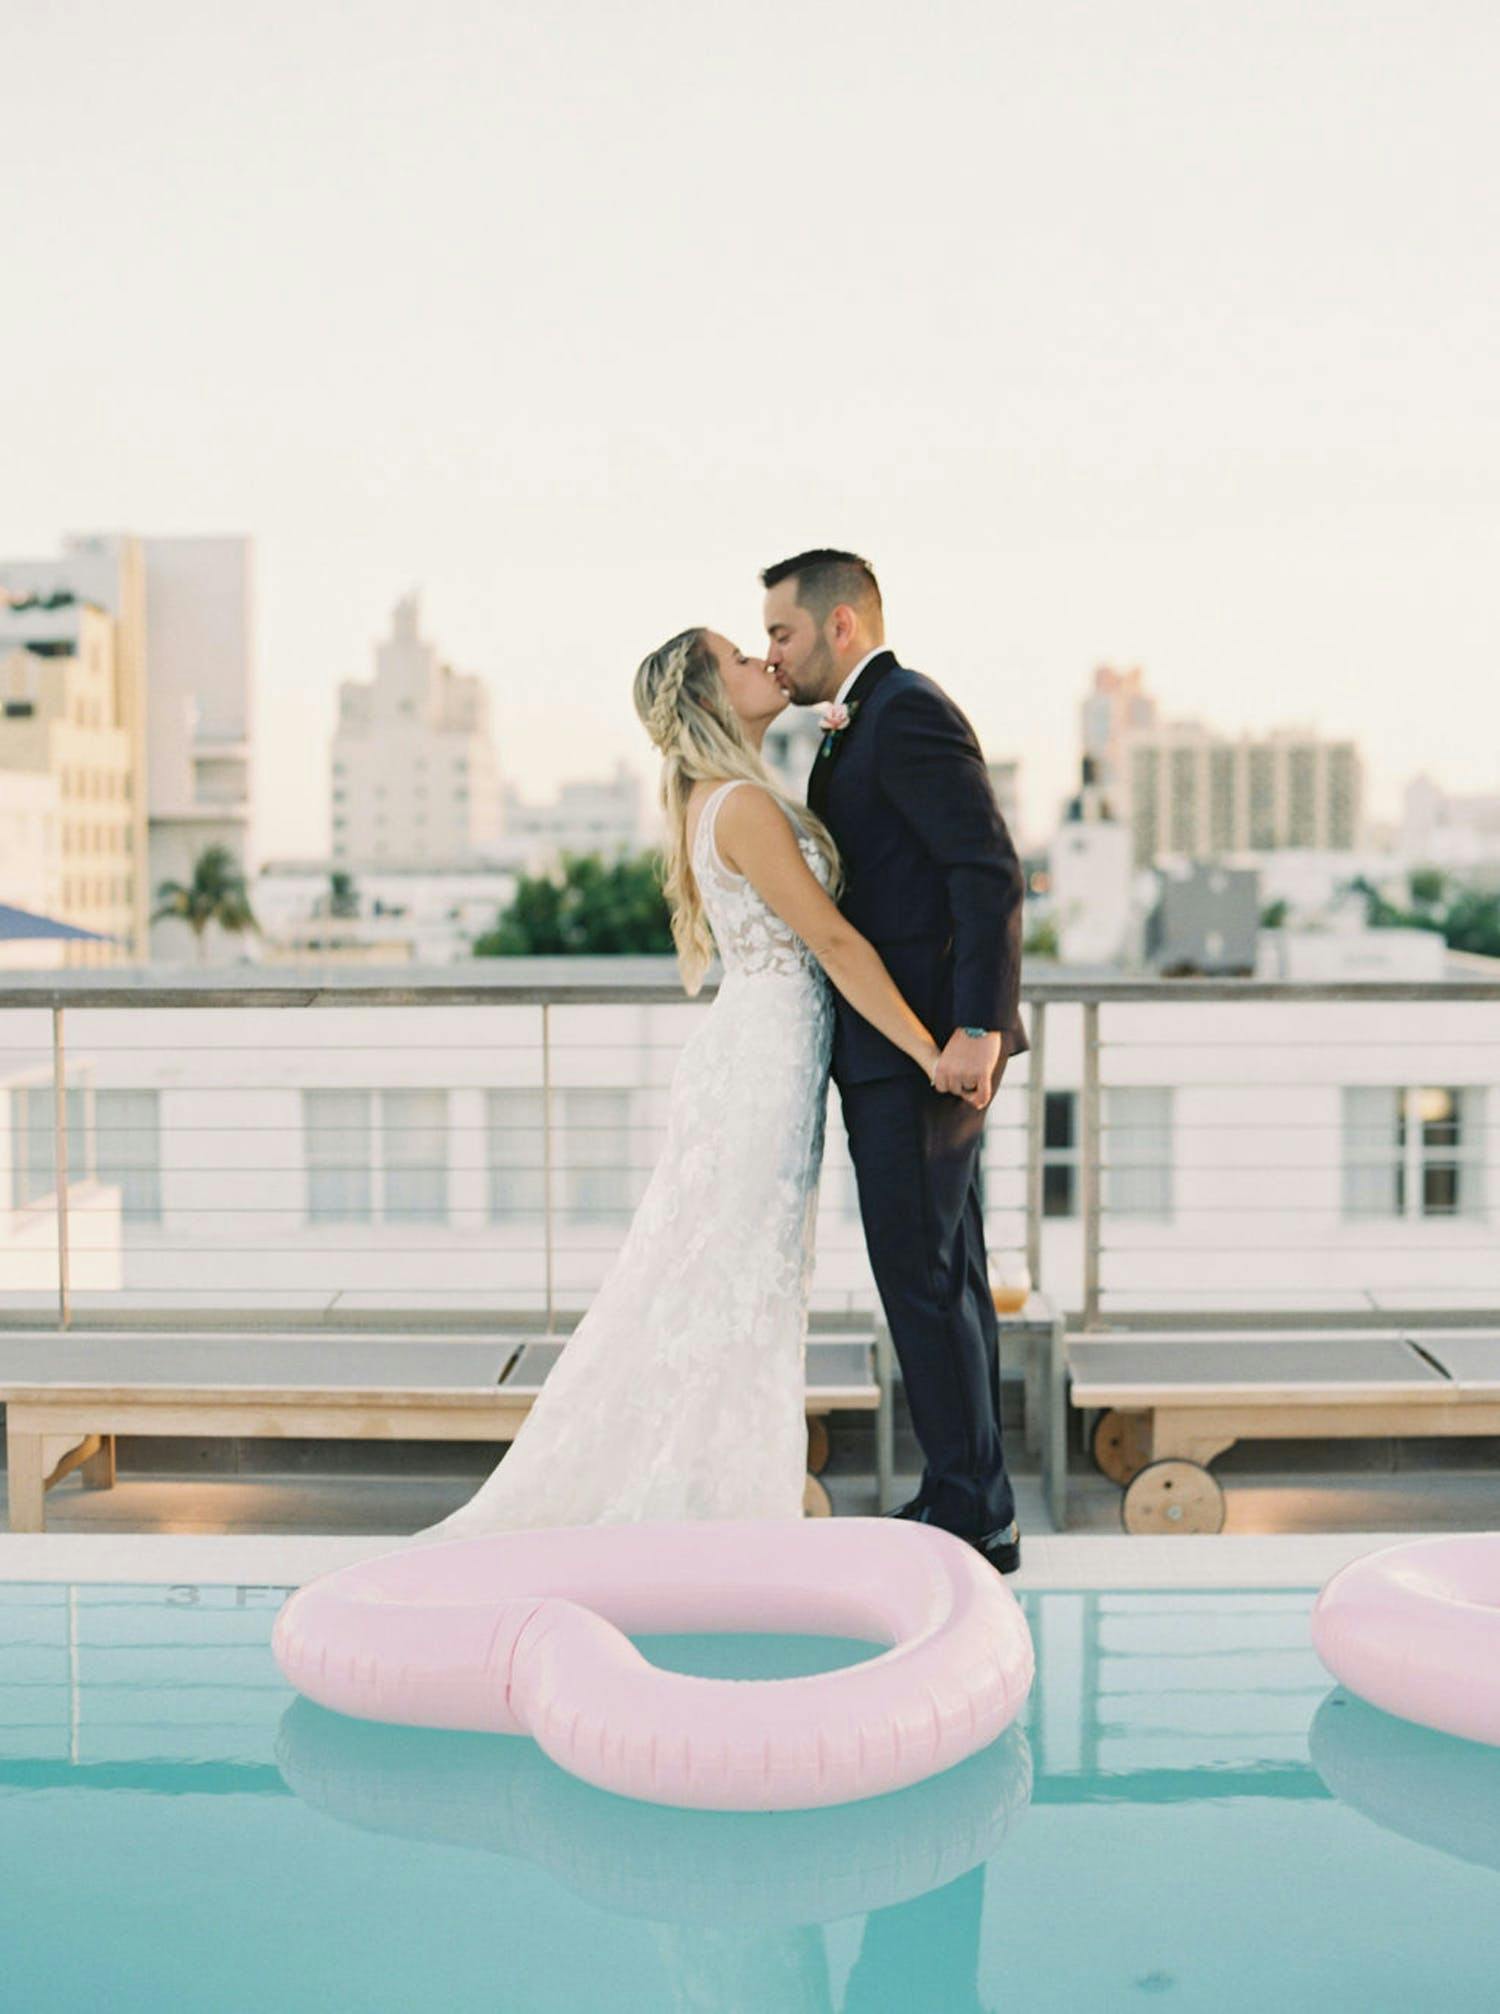 Couple kiss on rooftop venue in front of pool with heart-shaped inflatables | PartySlate